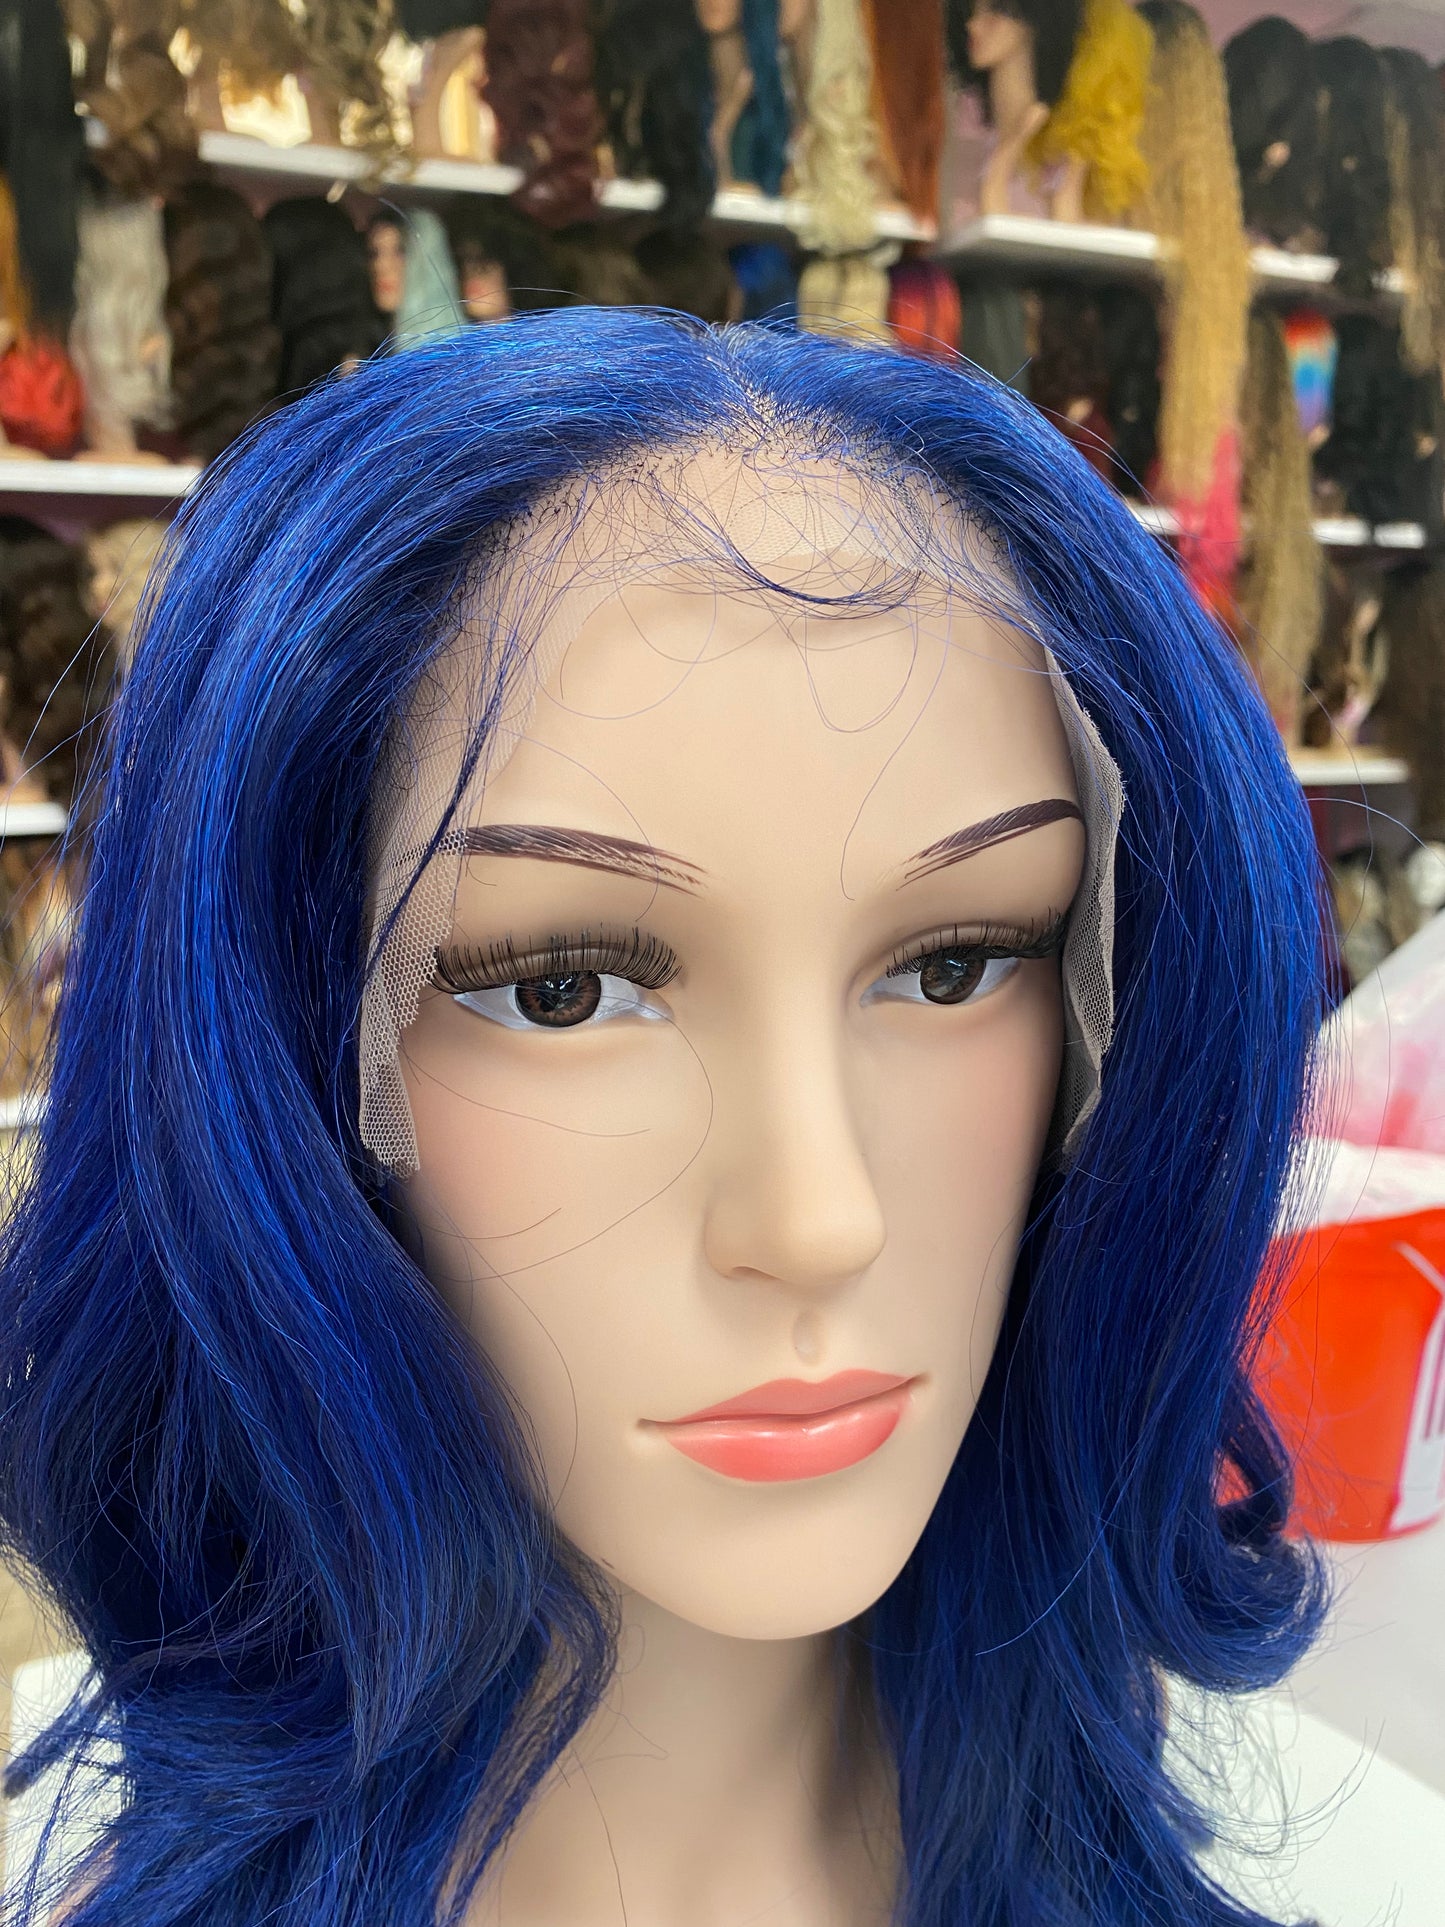 327 Dani - 13x4 Free Part Lace Front Wig - NAVYBLUE - DaizyKat Cosmetics 327 Dani - 13x4 Free Part Lace Front Wig - NAVYBLUE DaizyKat Cosmetics Wigs